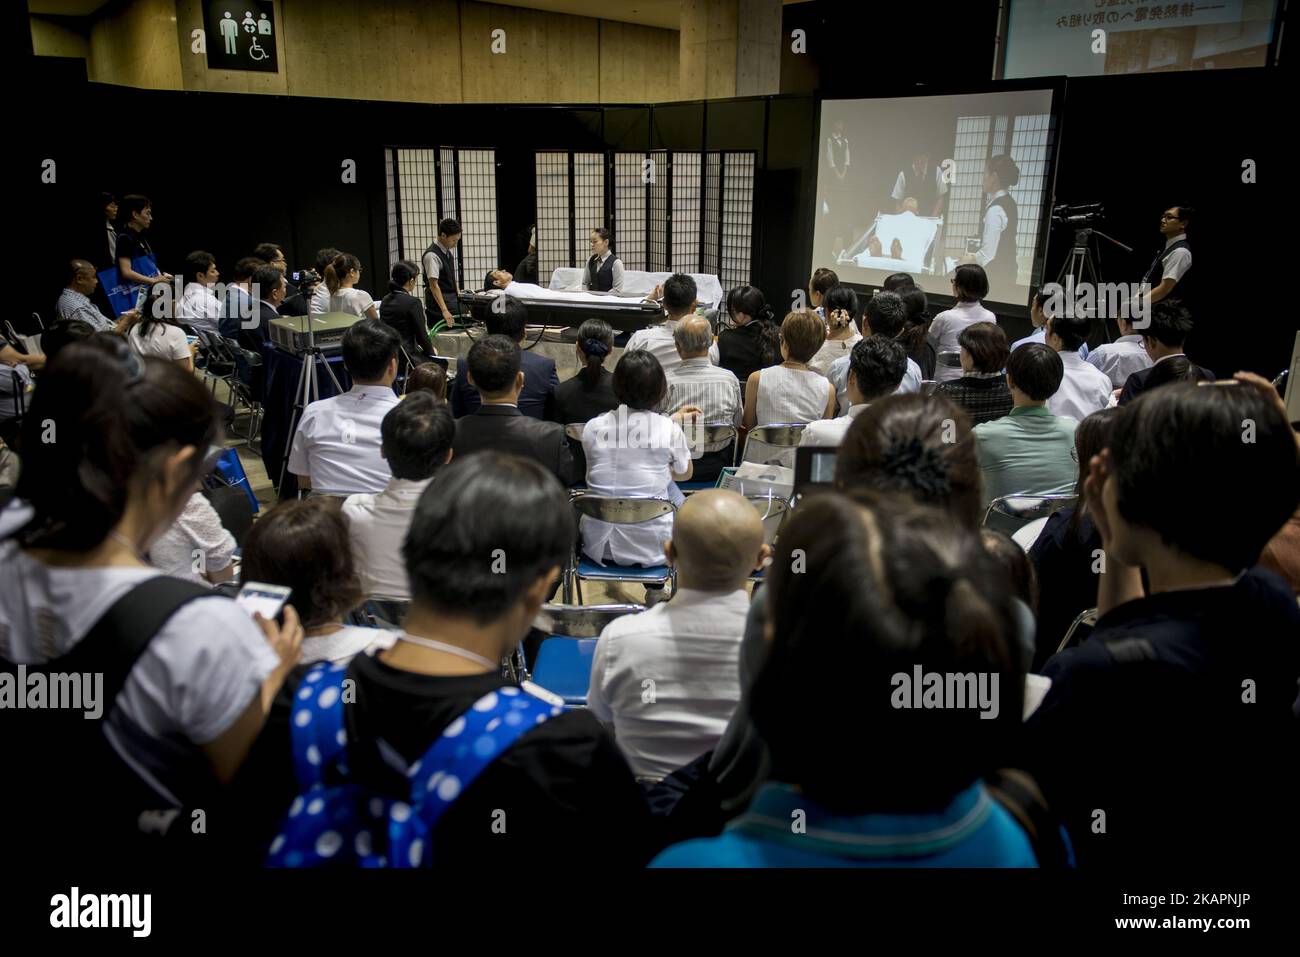 Demonstration of the deceased's body wash to the Tokyo Int'l Funeral & Cemetery Show in Tokyo, Japan on August 23, 2017. Hundreds of funeral home operators, cemeteries operators, crematorium operators, traders, suppliers, buyers, professional associations and investors gather at this professional funeral event.(Photo by Alessandro Di Ciommo/NurPhoto) Stock Photo